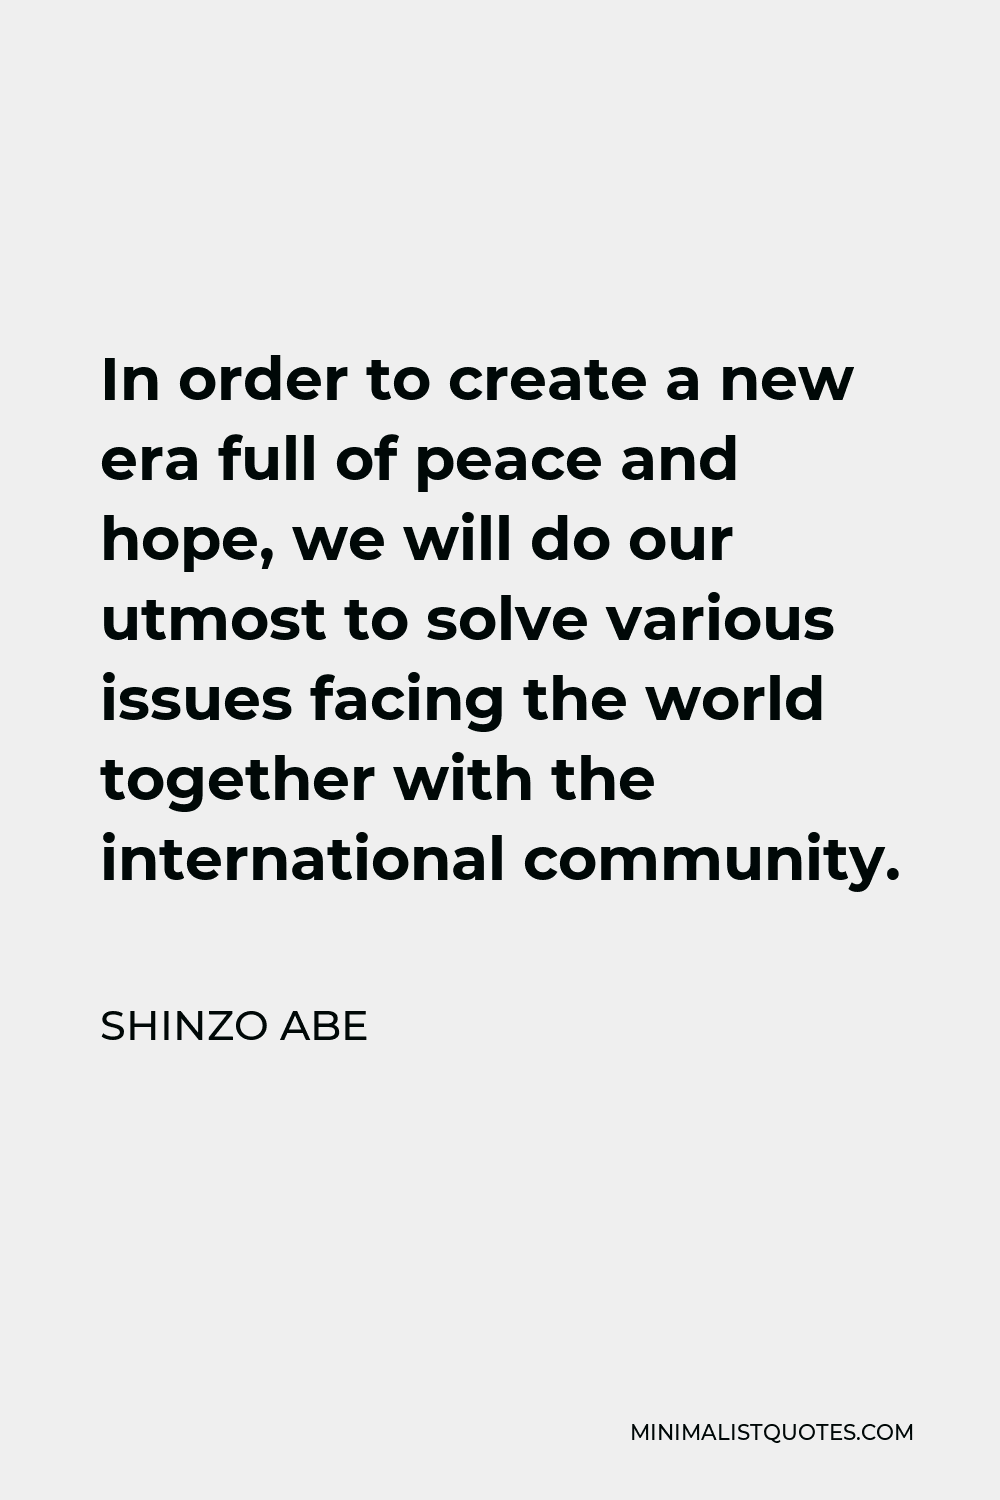 Shinzo Abe Quote - In order to create a new era full of peace and hope, we will do our utmost to solve various issues facing the world together with the international community.